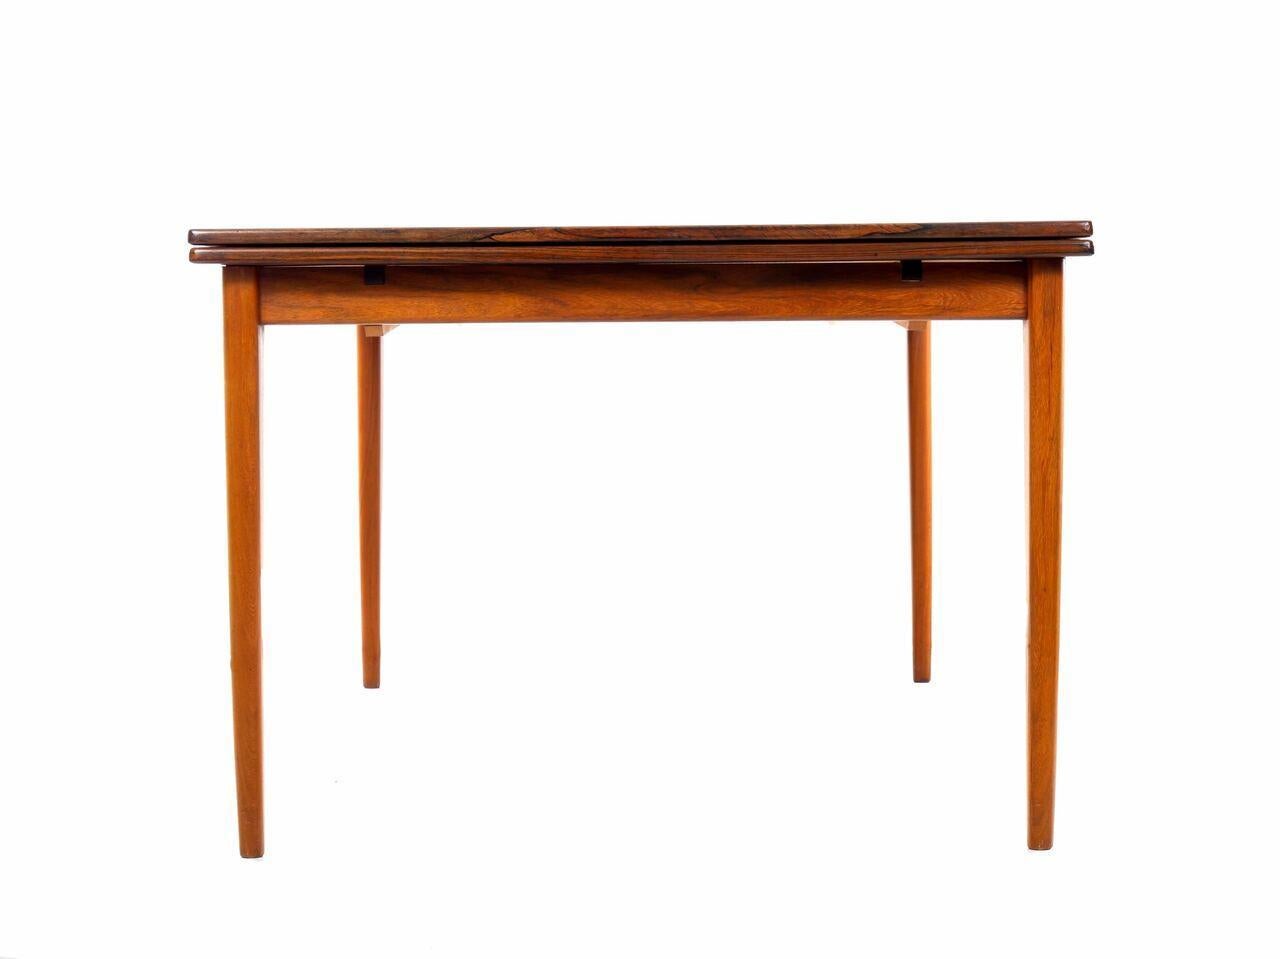 Danish Mid-Century Modern Rosewood Dining Table by Niels Møller, Model No. 254 3